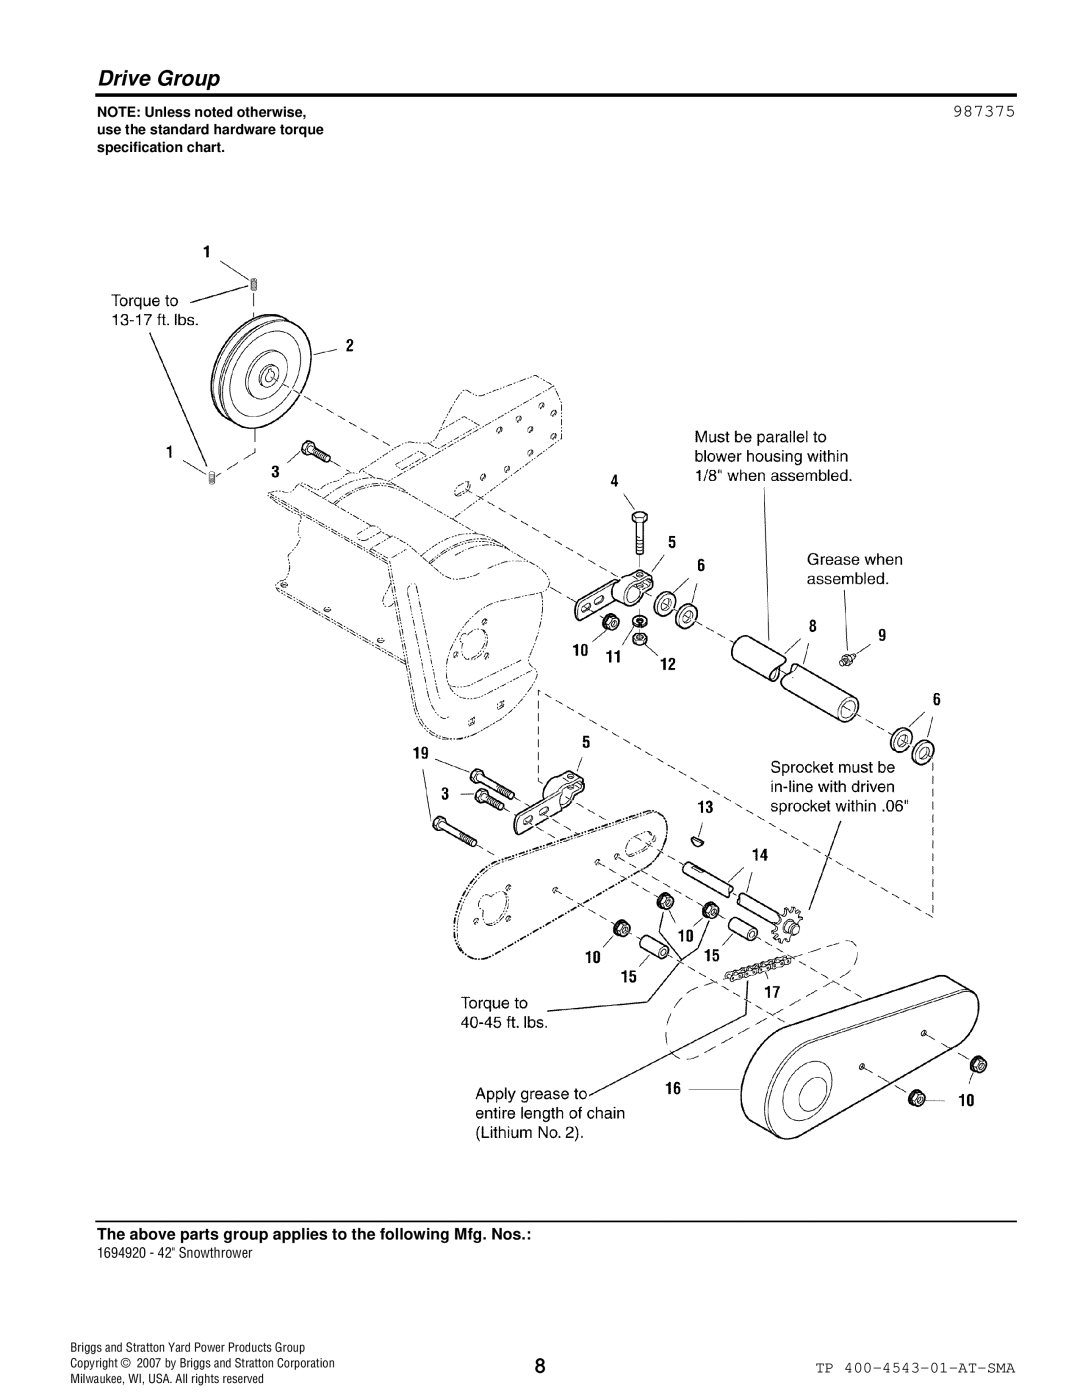 Simplicity 1694920 manual Drive Group, 987375, NOTE Unless noted otherwise, Briggs and Stratton Yard Power Products Group 